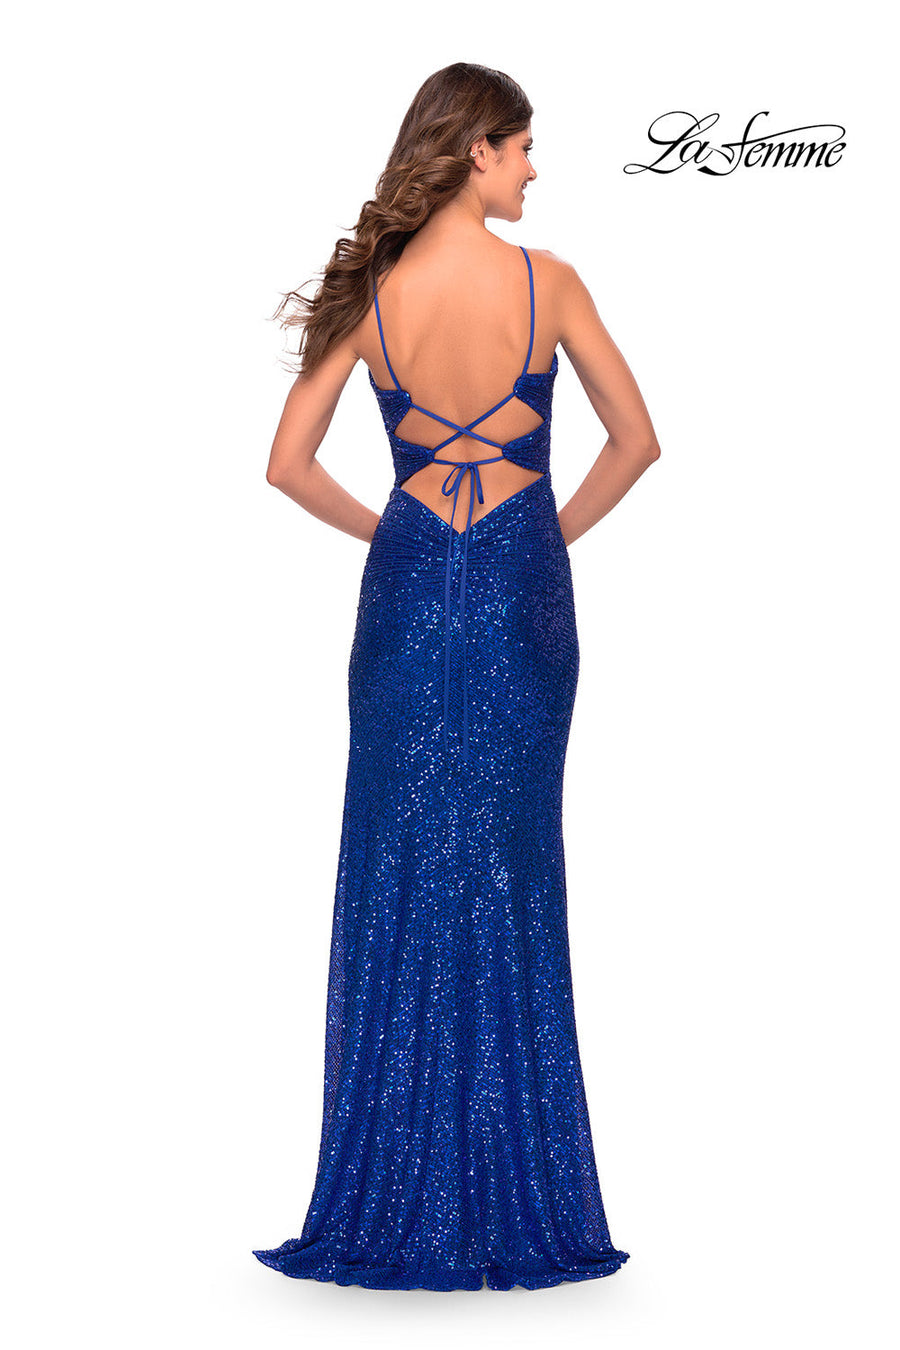 La Femme 31356 prom dress images.  La Femme 31356 is available in these colors: Periwinkle, Royal Blue.